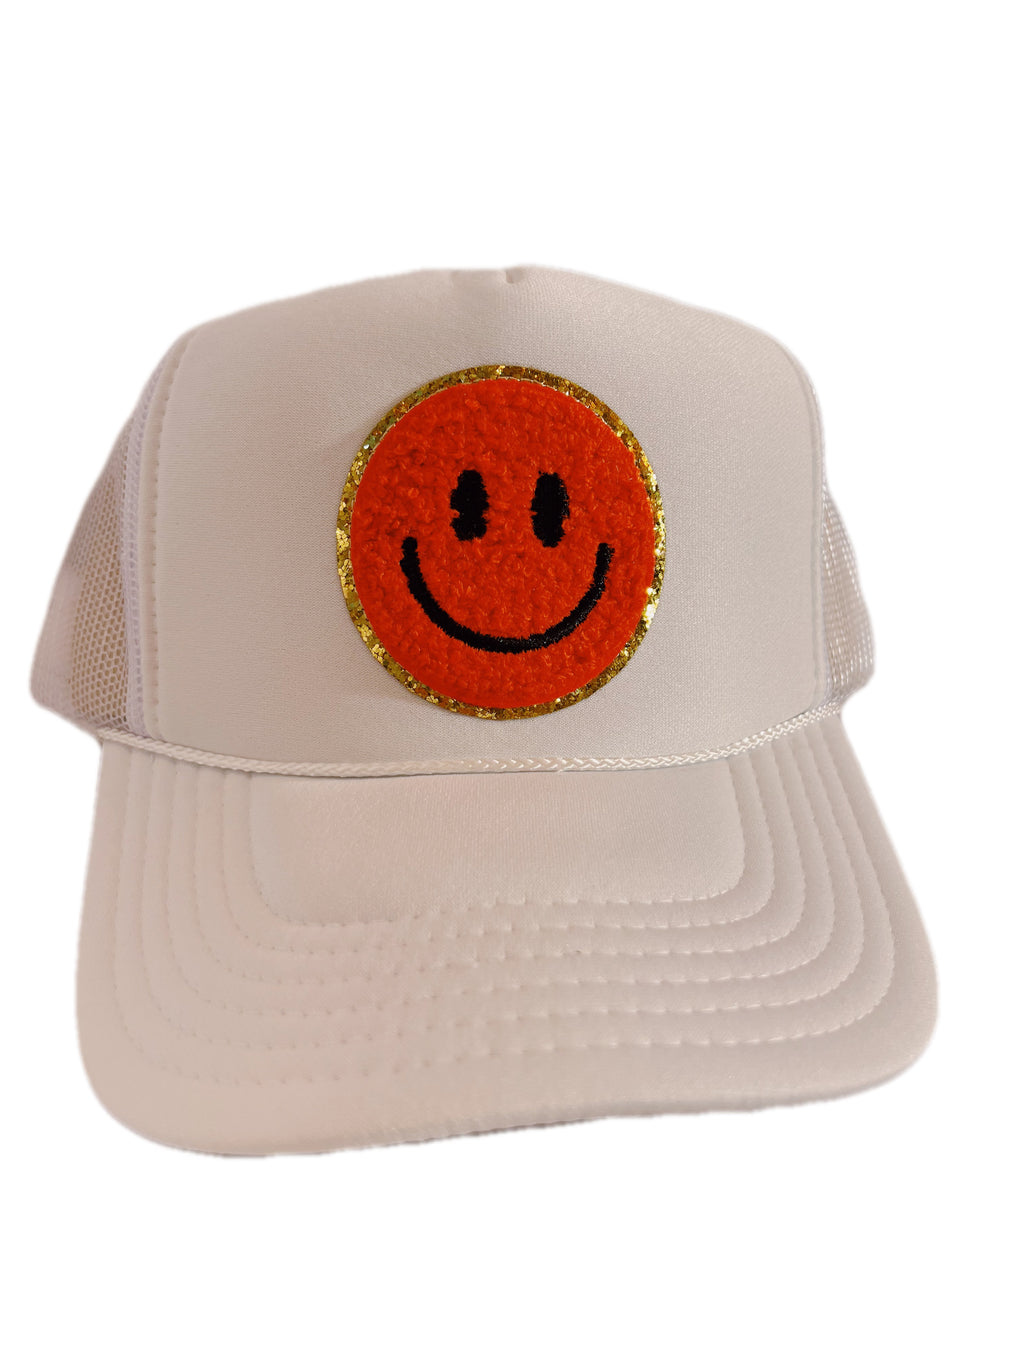 WHITE TRUCKER WITH RED SMILEY ☻